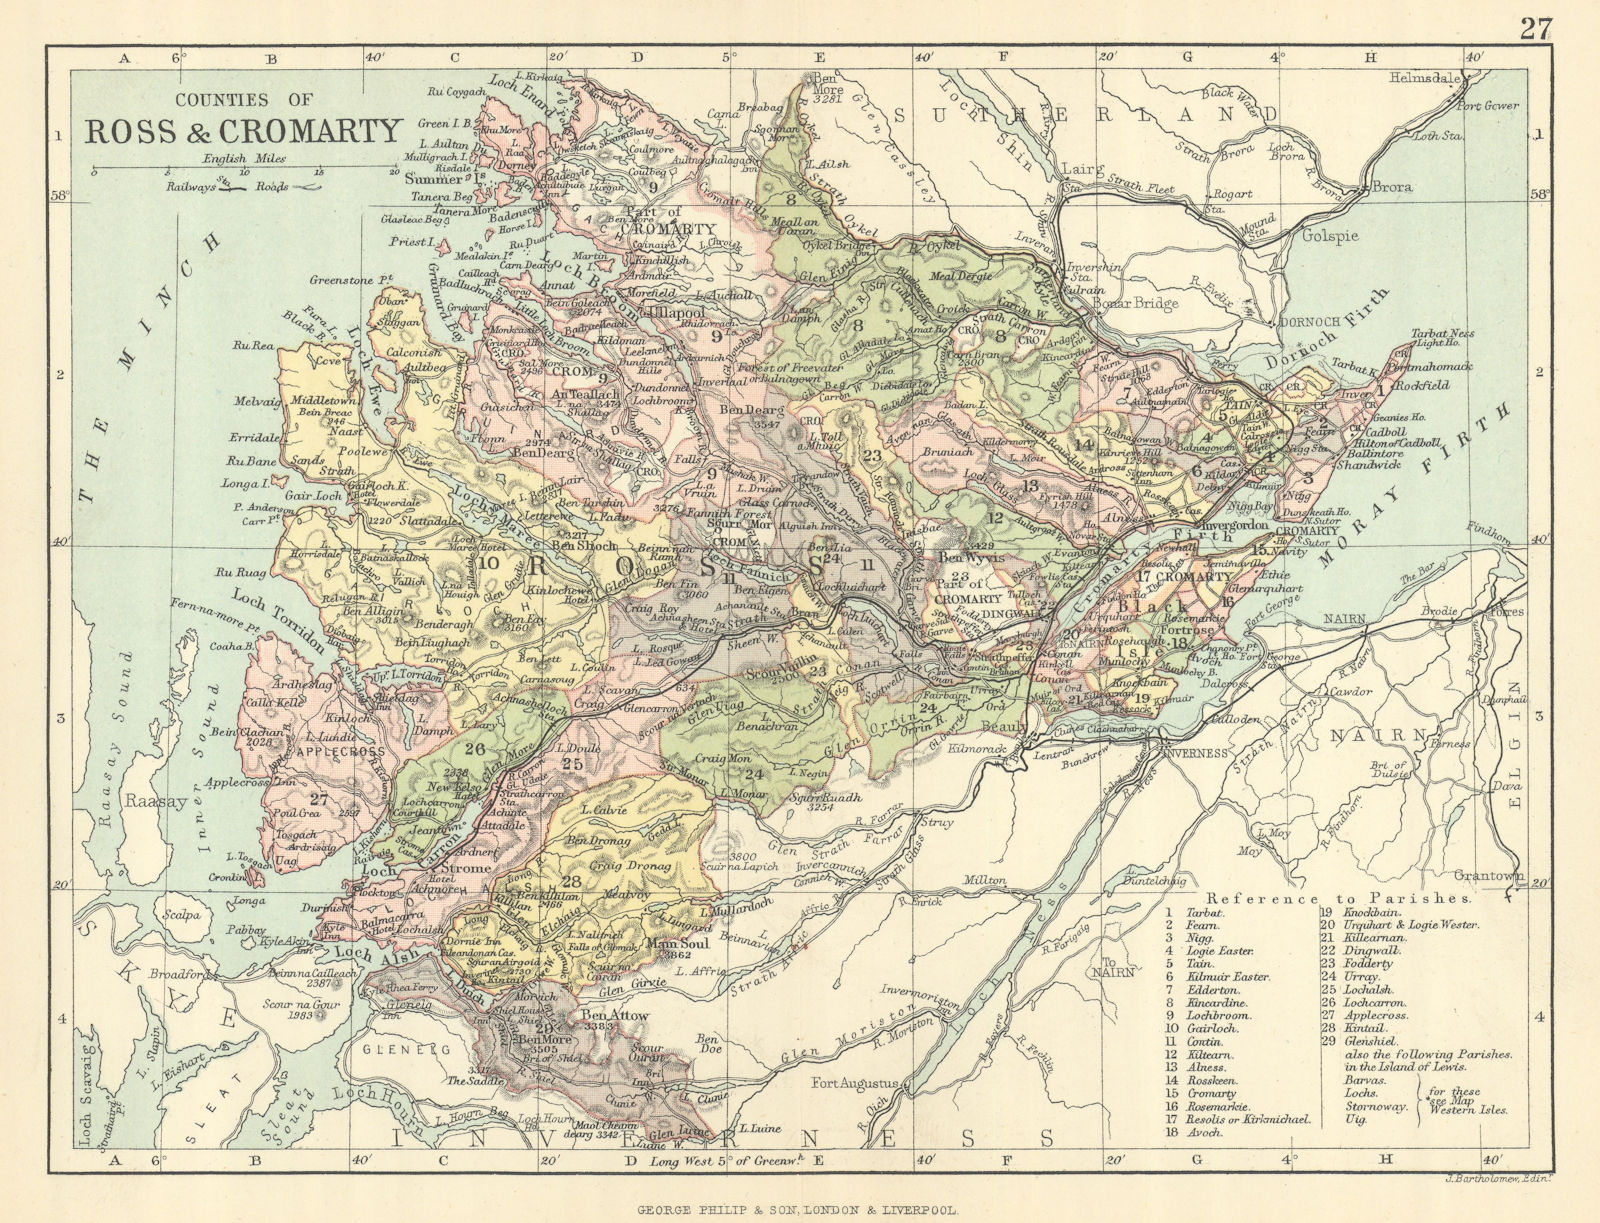 'Counties of Ross & Cromarty'. Ross-shire & Cromartyshire. BARTHOLOMEW 1886 map